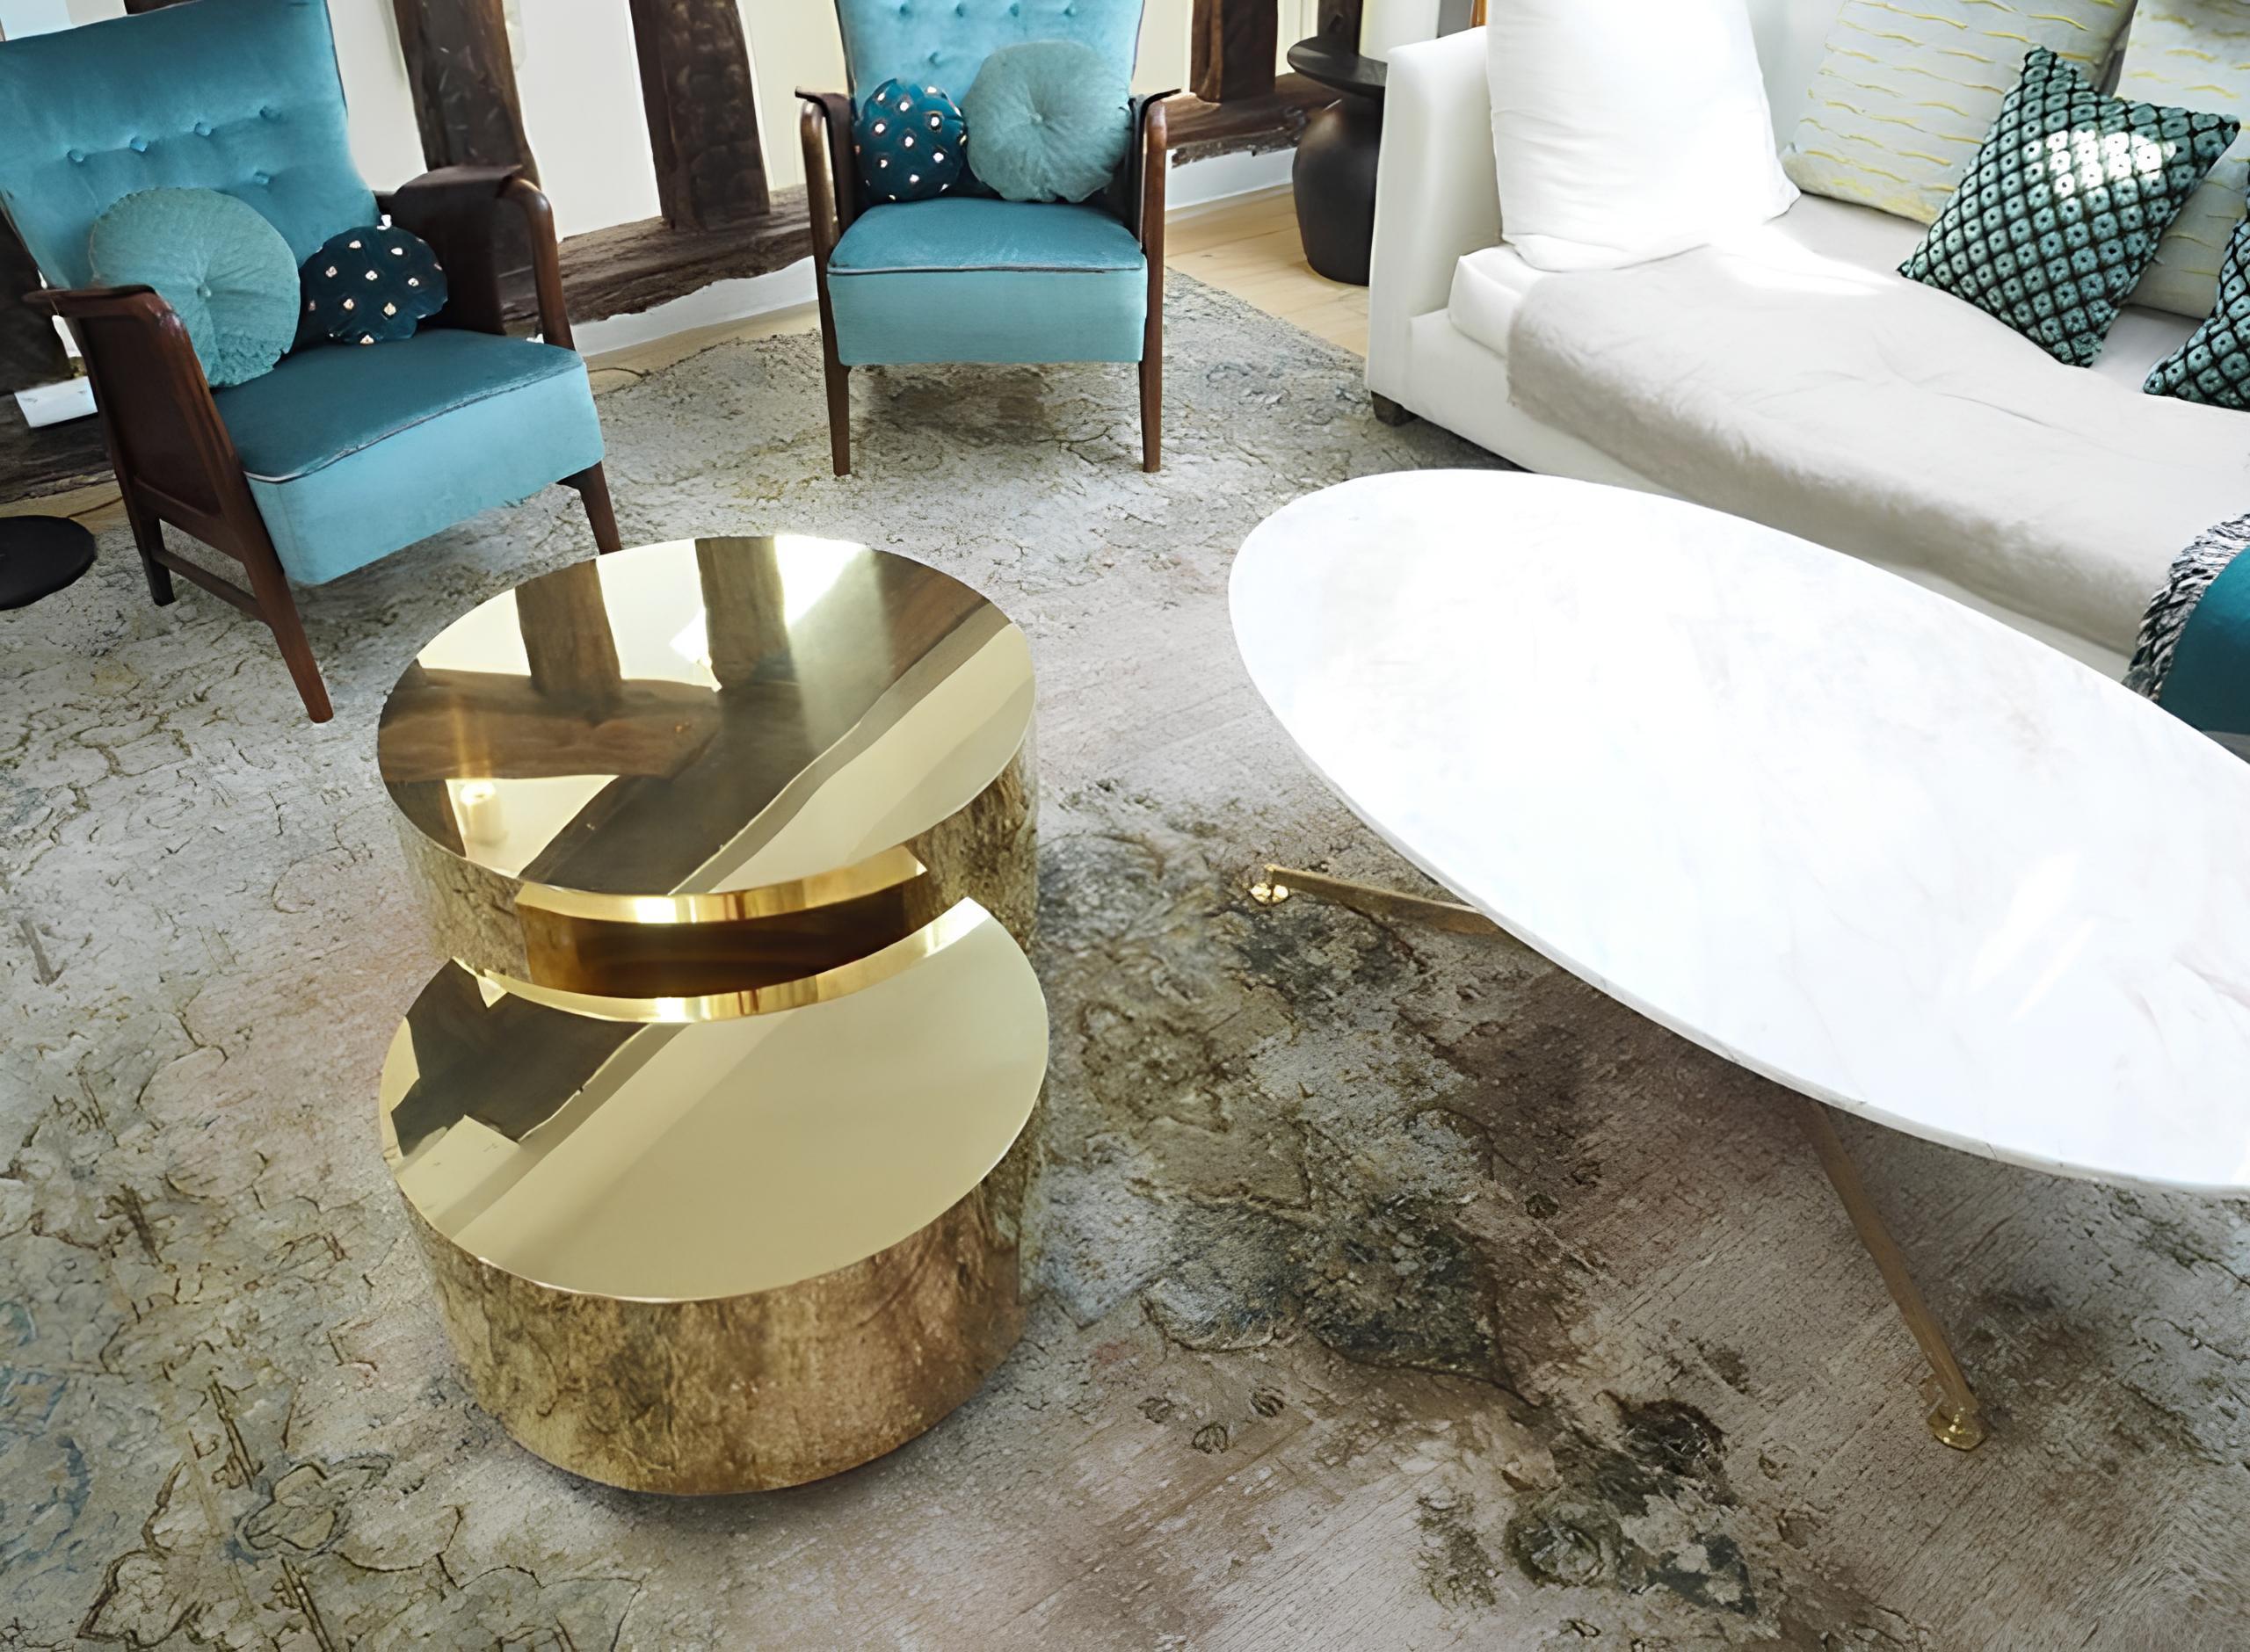 Luna Brass/Steel Collection - Coffee table / Side Tables / Auxiliary Tables

Luna Brass/Steel Collection of side and coffee tables, a collection of moon-inspired tables, handcrafted in Spain from your choice of satin brass or stainless steel.